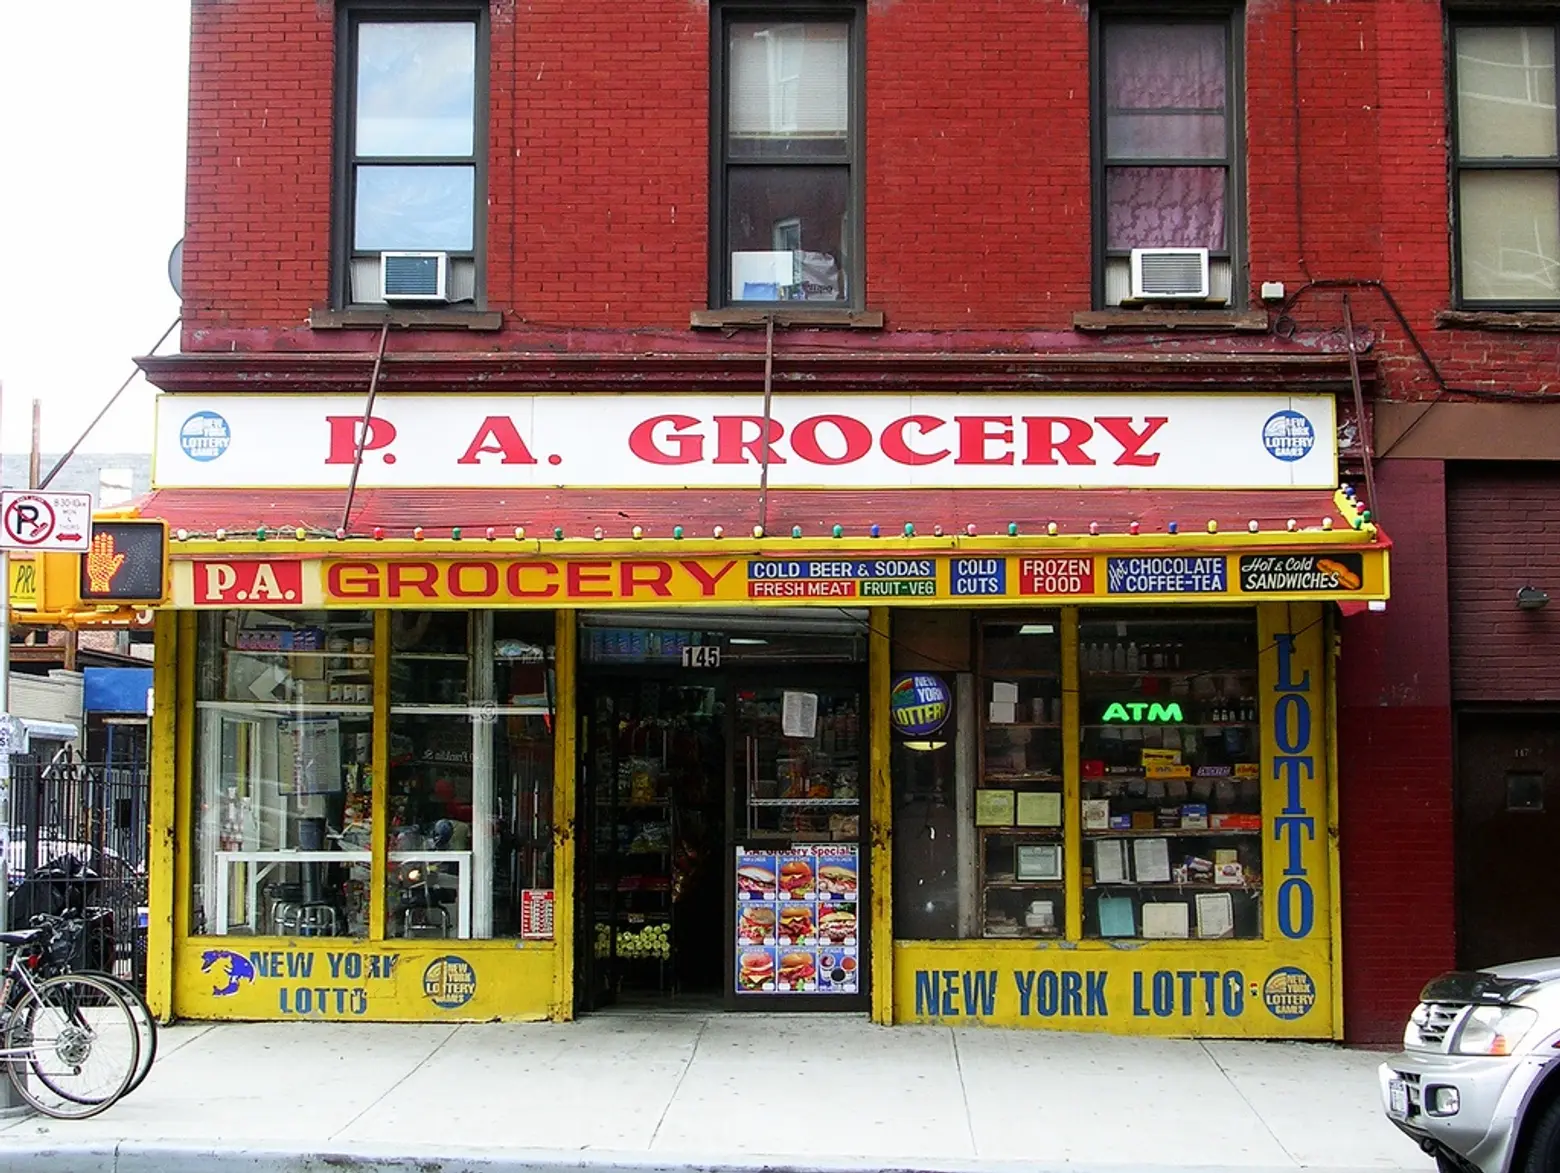 1,000 NYC bodegas will close today to protest Trump’s ‘Muslim ban’